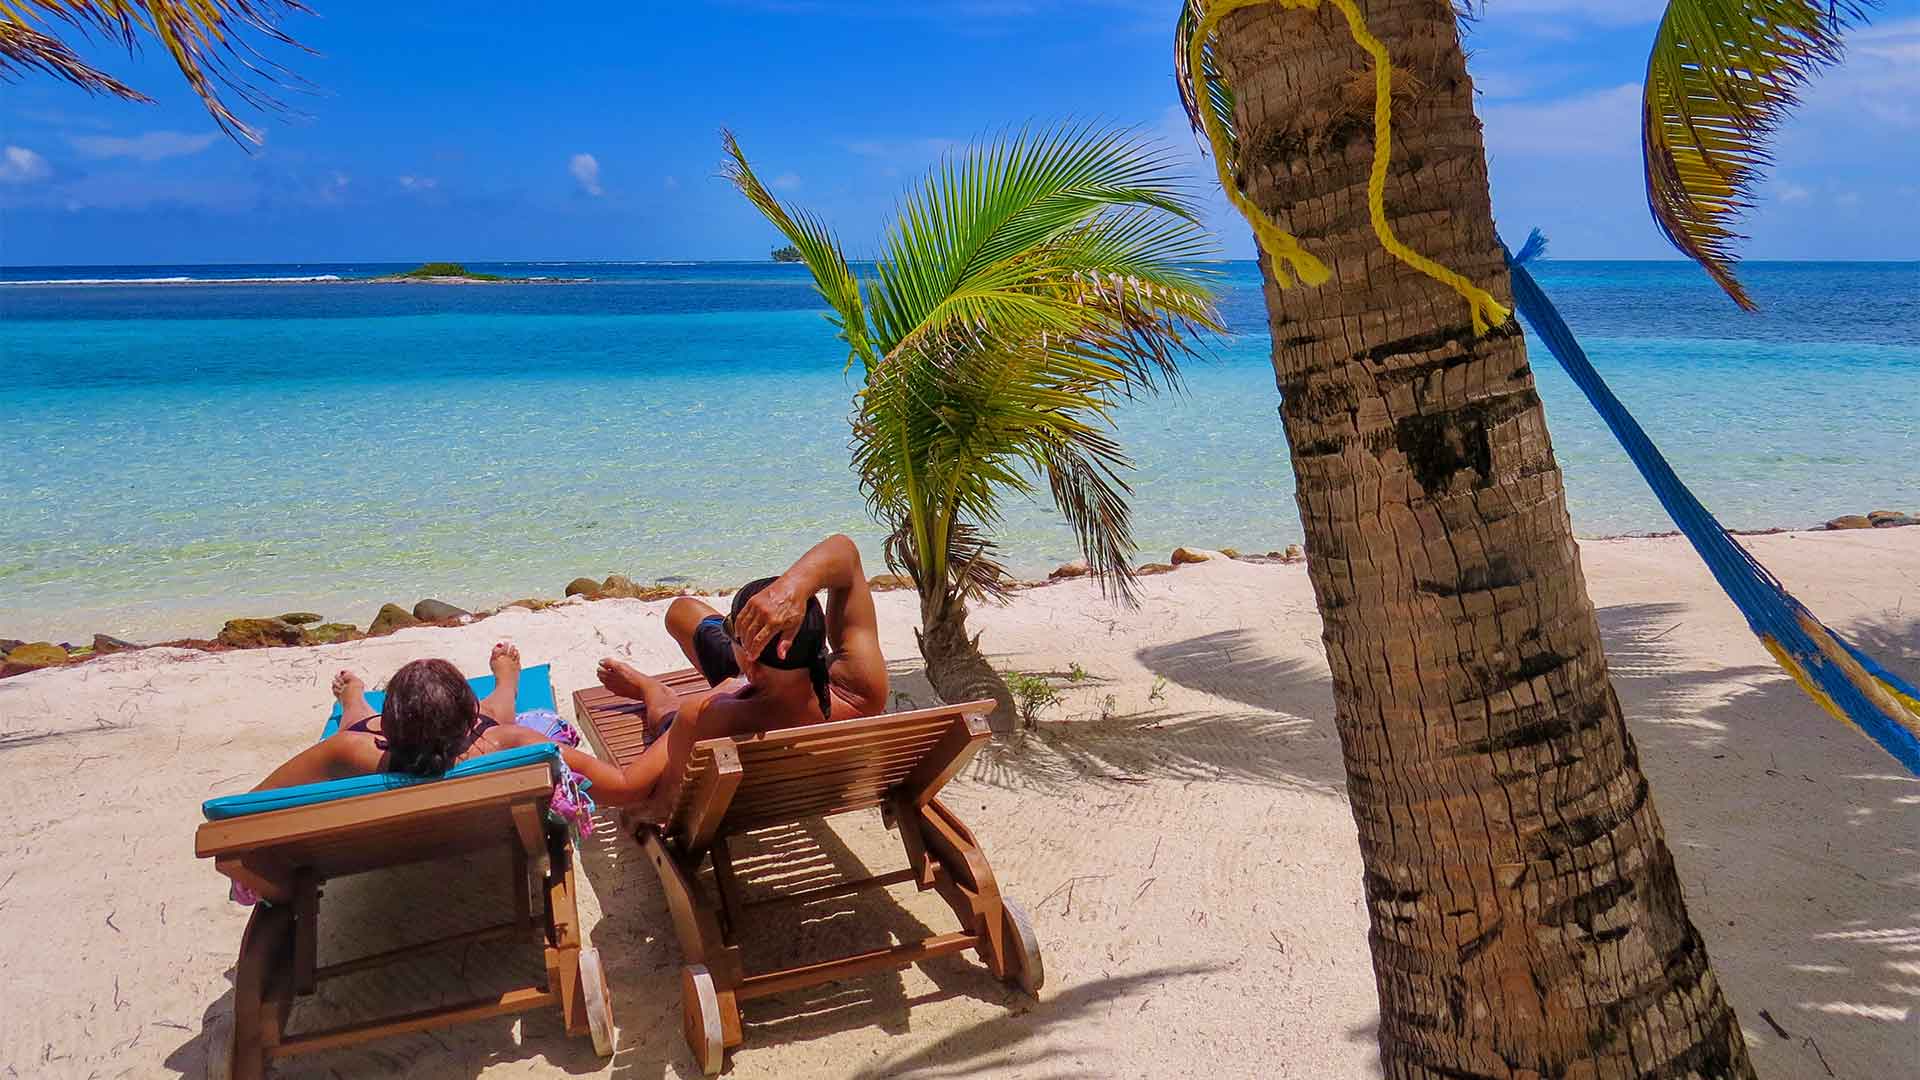 A happy couple leisurely relaxing on Belize's pristine white sand beaches, enjoying the tranquil azure waters and serene coastal ambiance.